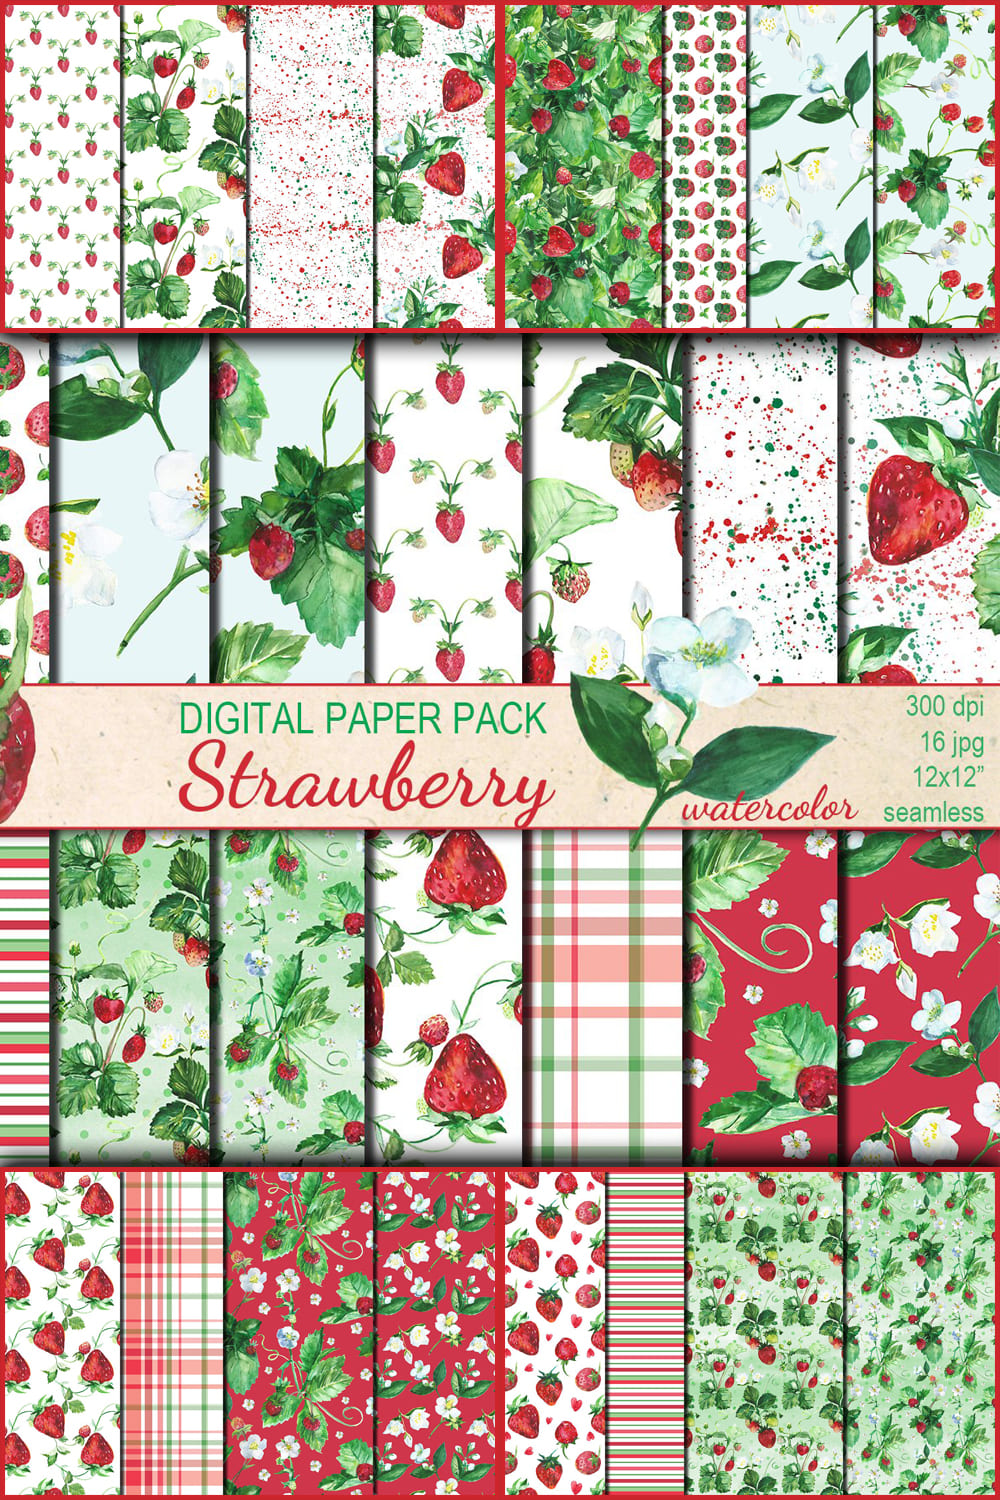 All strawberry patterns are in the same colors.